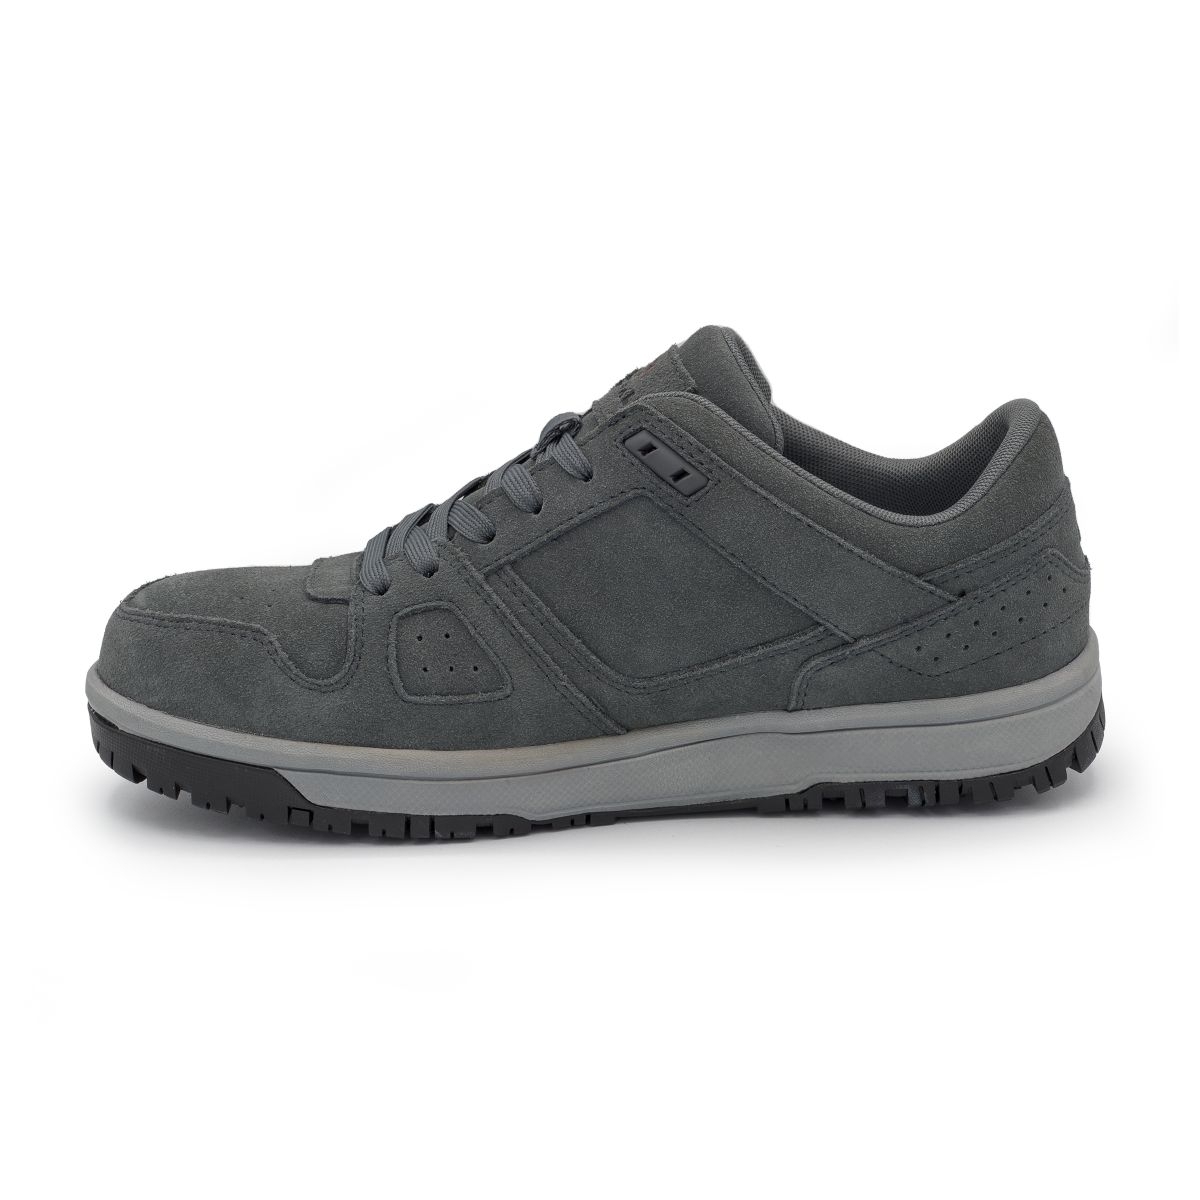 AIRWALK SAFETY Men's Mongo Composite Toe EH Work Shoe Charcoal/Grey - AW6301 CHARCOAL/GRAY - CHARCOAL/GRAY, 7.5-W